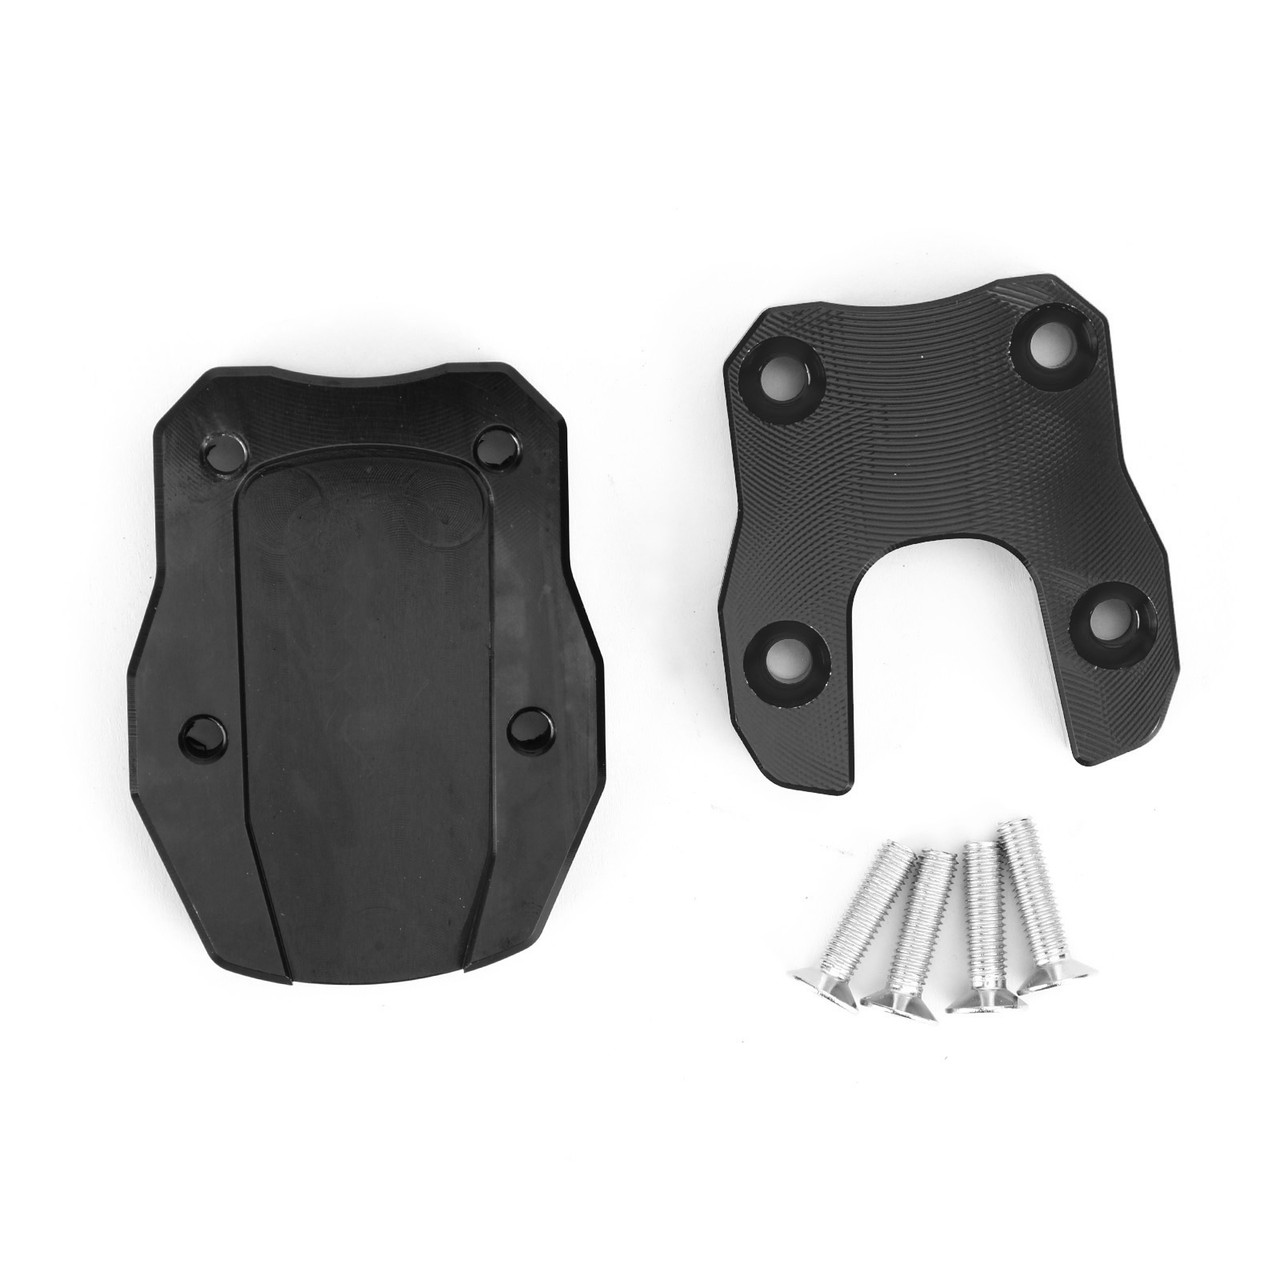 Kickstand Side Stand Extension Pad Fit For Honda ADV150 19-21 PCX 125 150 18-19 Black